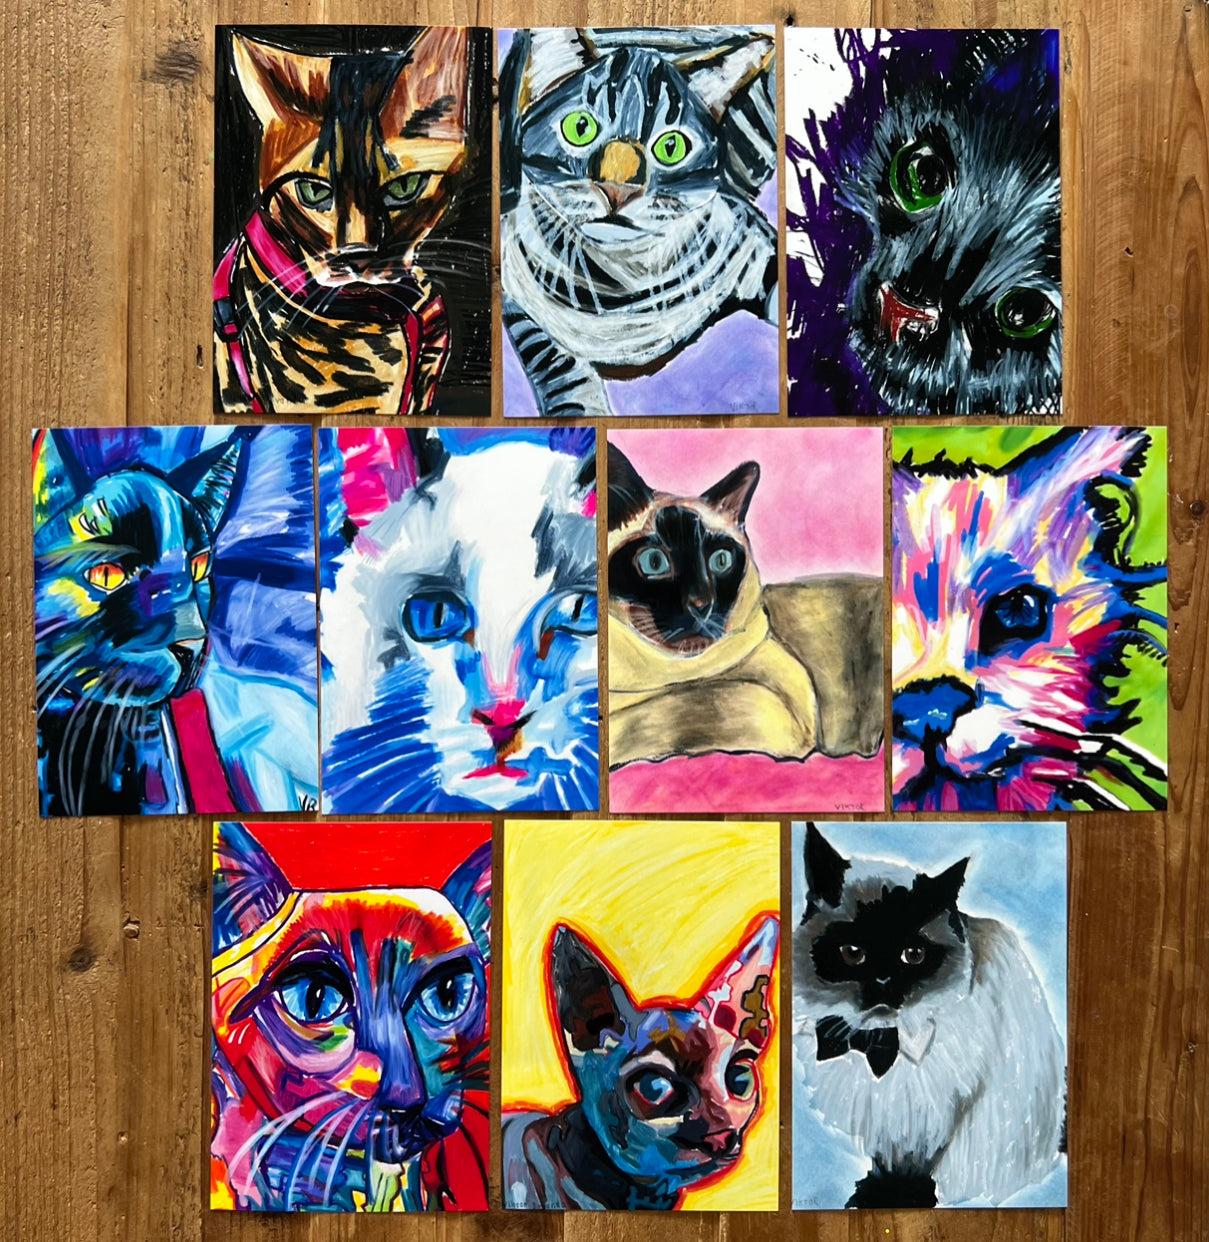 Oh my Cats - Set of 10 prints in size 5x7"